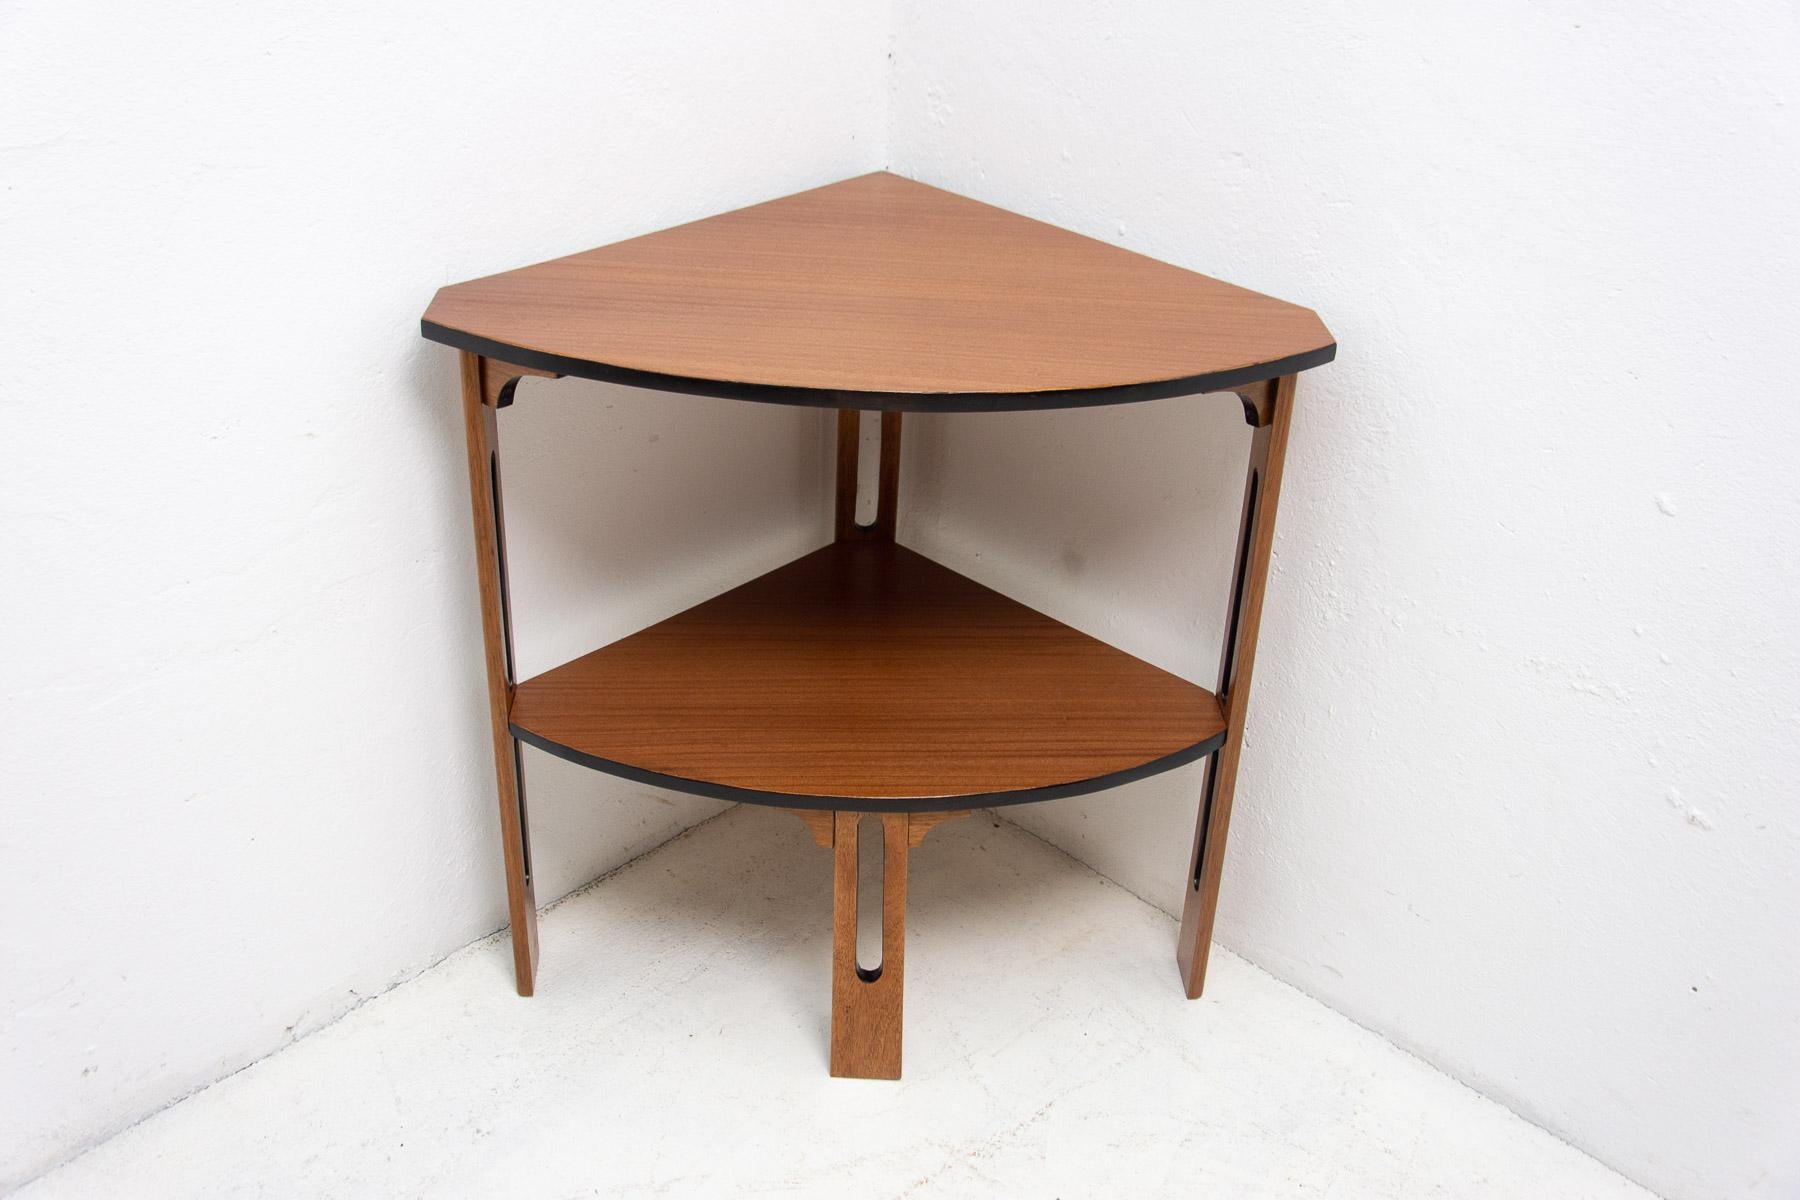 corner side table Art Deco, 1930’s, Czechoslovakia The table was made in the 1930s in the former Czechoslovakia in the ART DECO style. It is made of mahogany and beech wood. The edges and inner parts of the table are lined with black lacquered